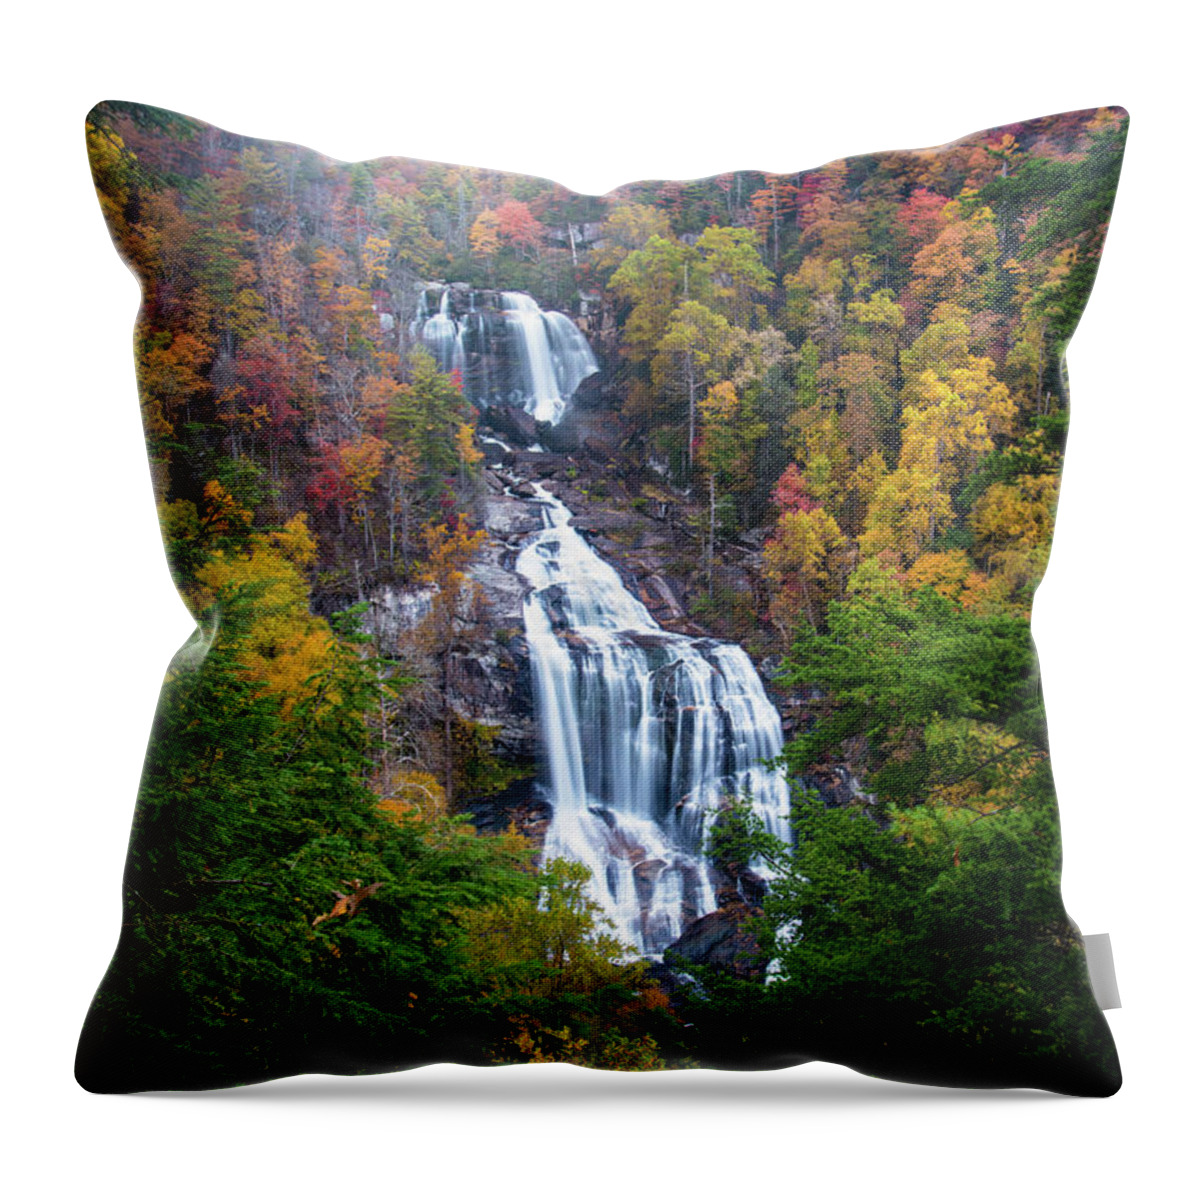 Landscape Throw Pillow featuring the photograph Blue Ridge Mountains Asheville NC Whitewater Falls Autumn Scenic by Robert Stephens